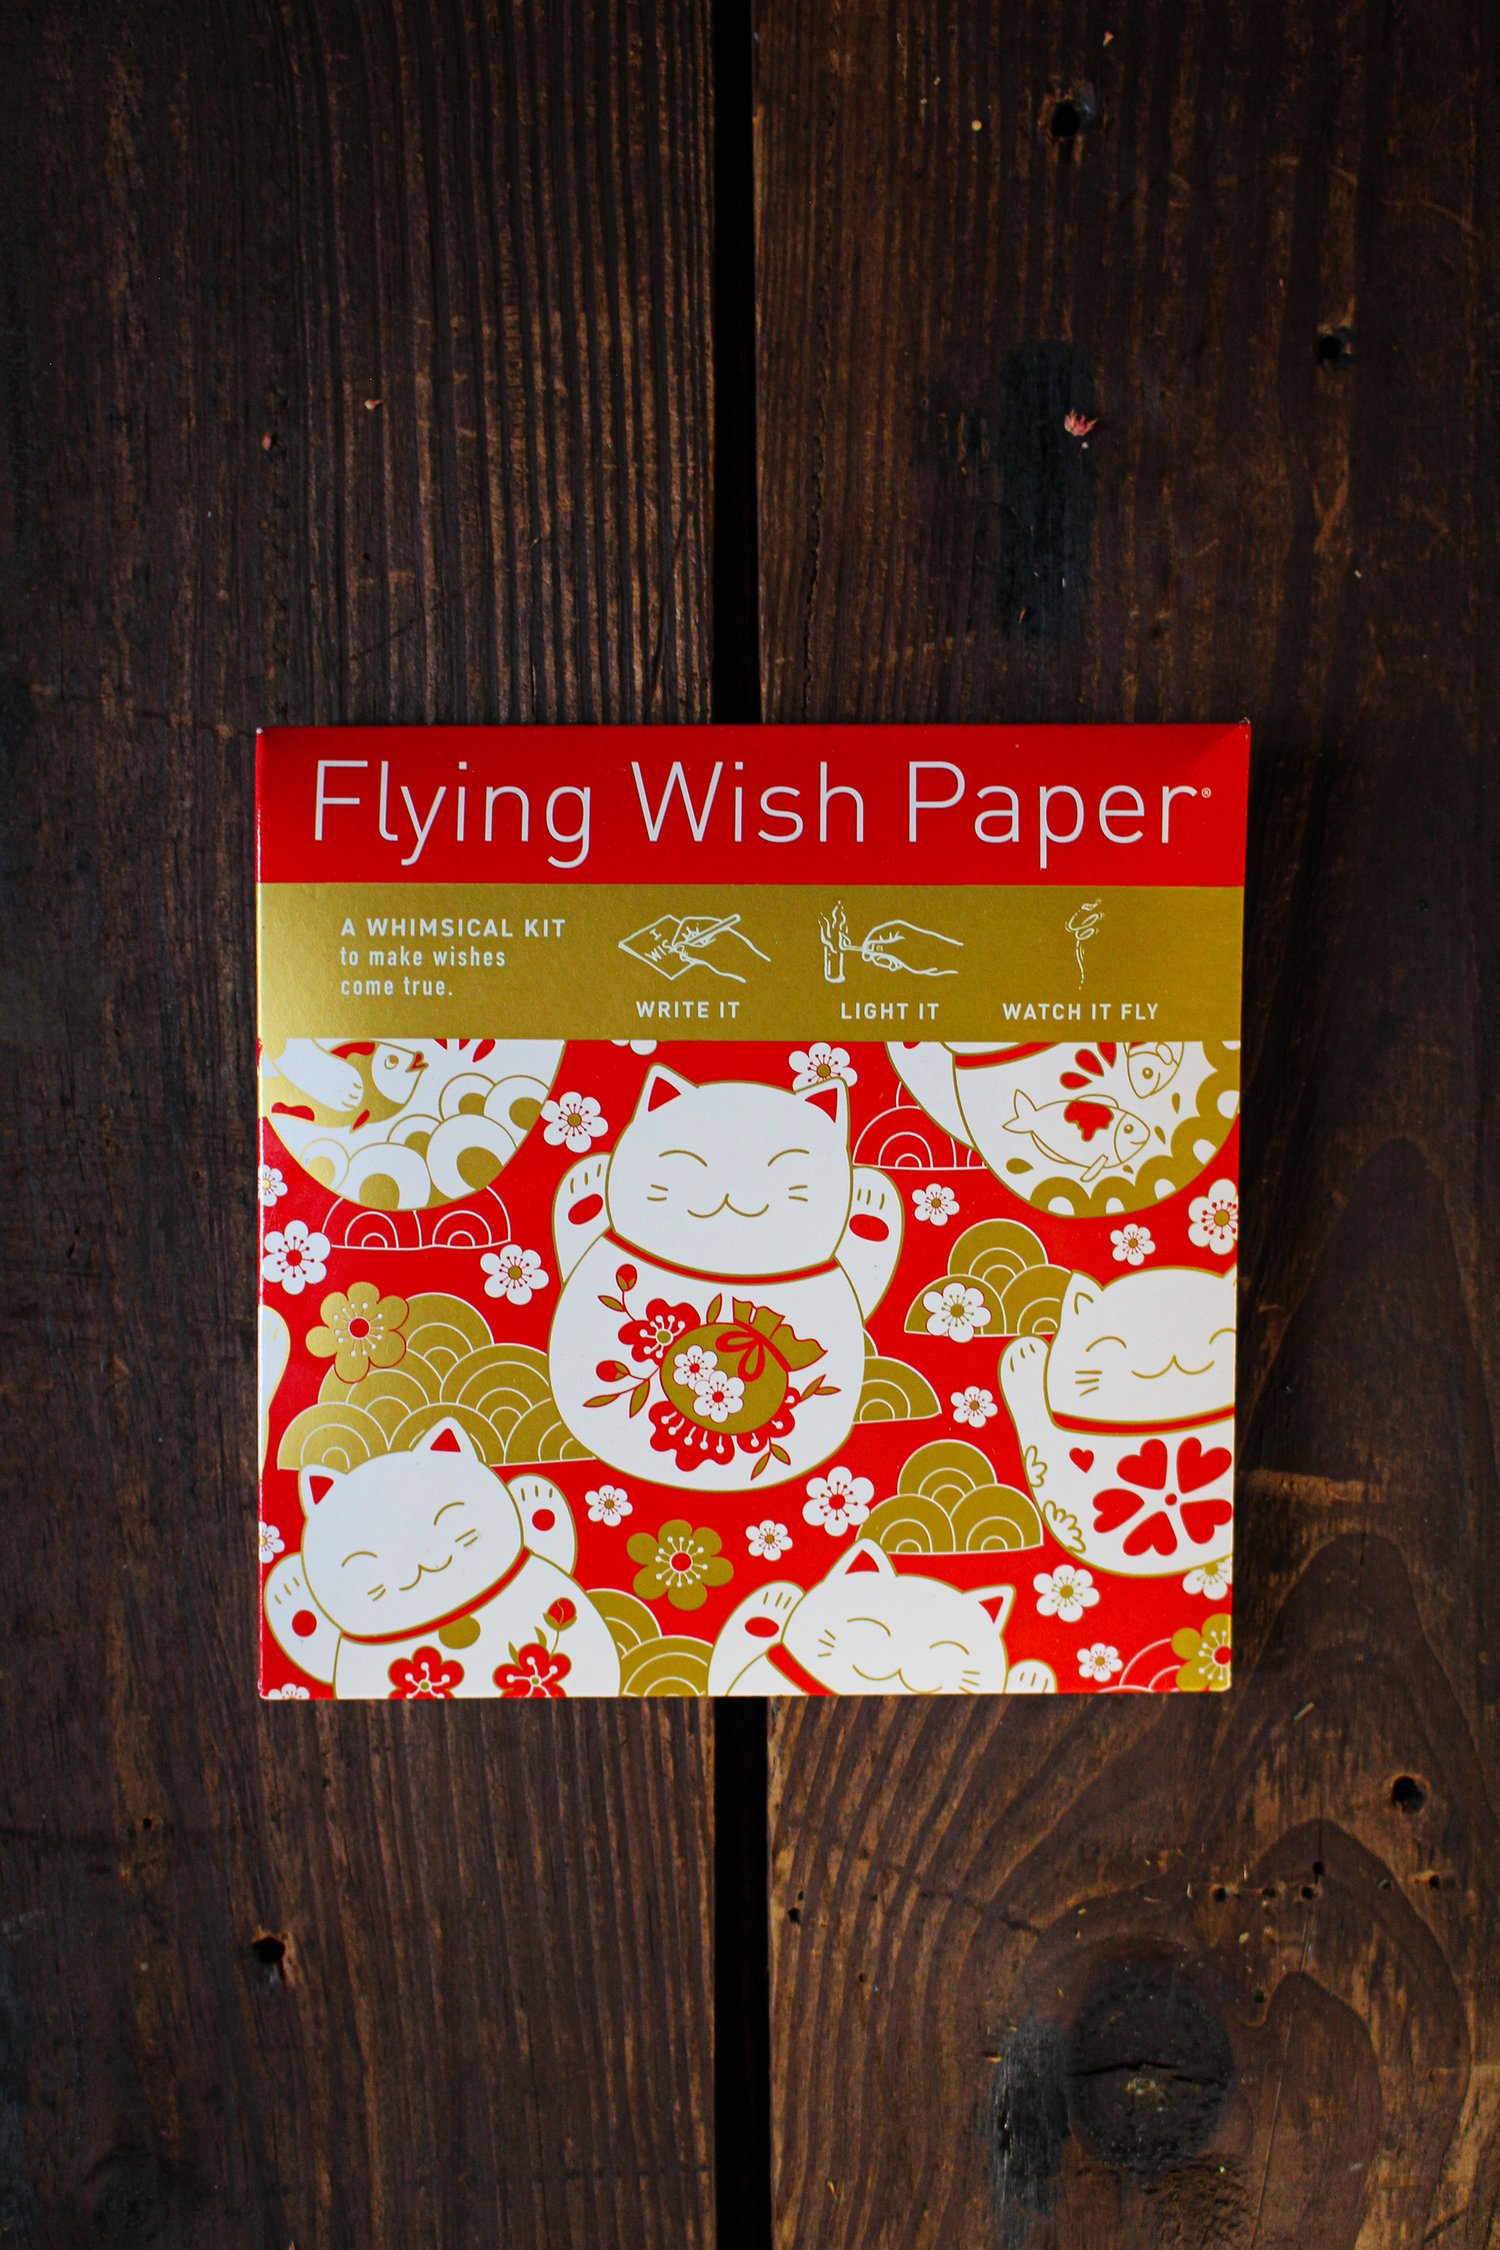 Flying Wish Paper — Sideshow Gallery, Flying Wish Paper 